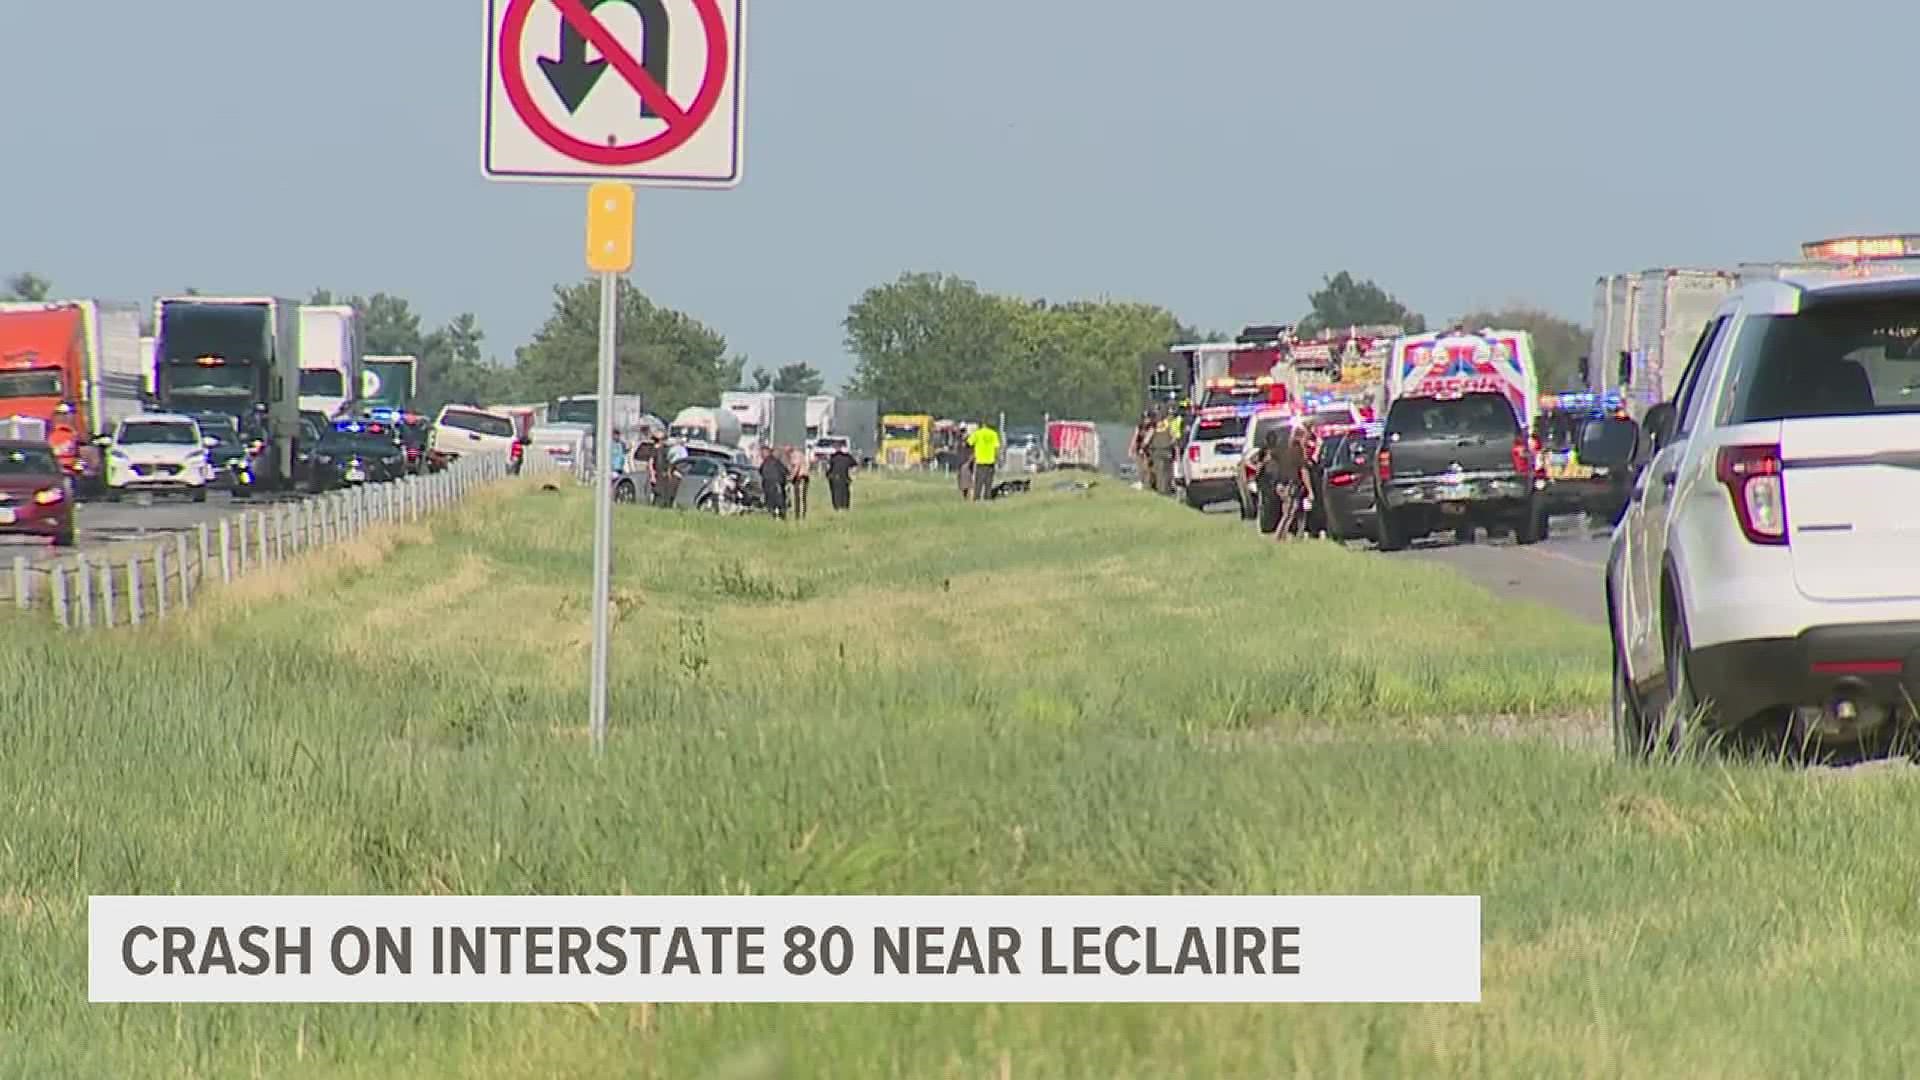 The collision happened just before 5 p.m. on the eastbound lanes of Interstate 80 between Bettendorf and LeClaire.